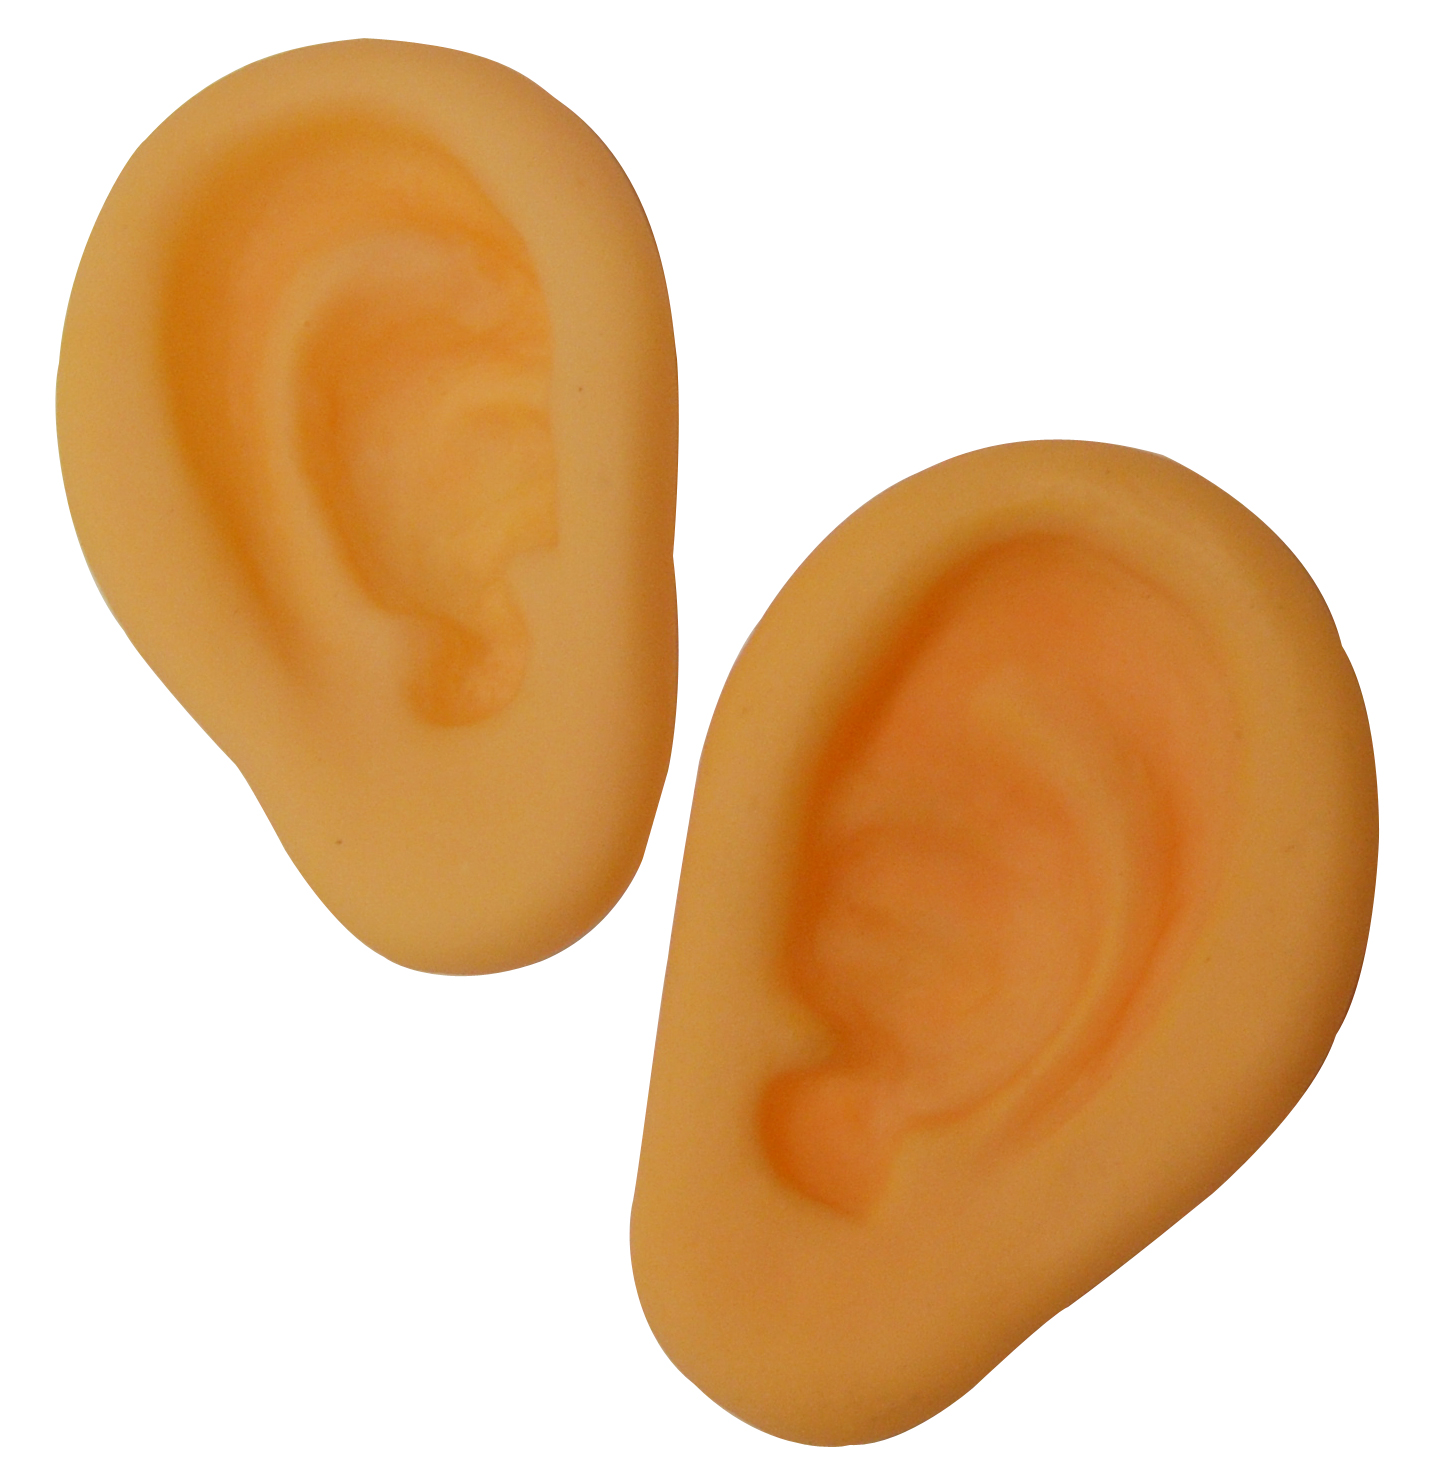 Ears listening clipart top pictures gallery online